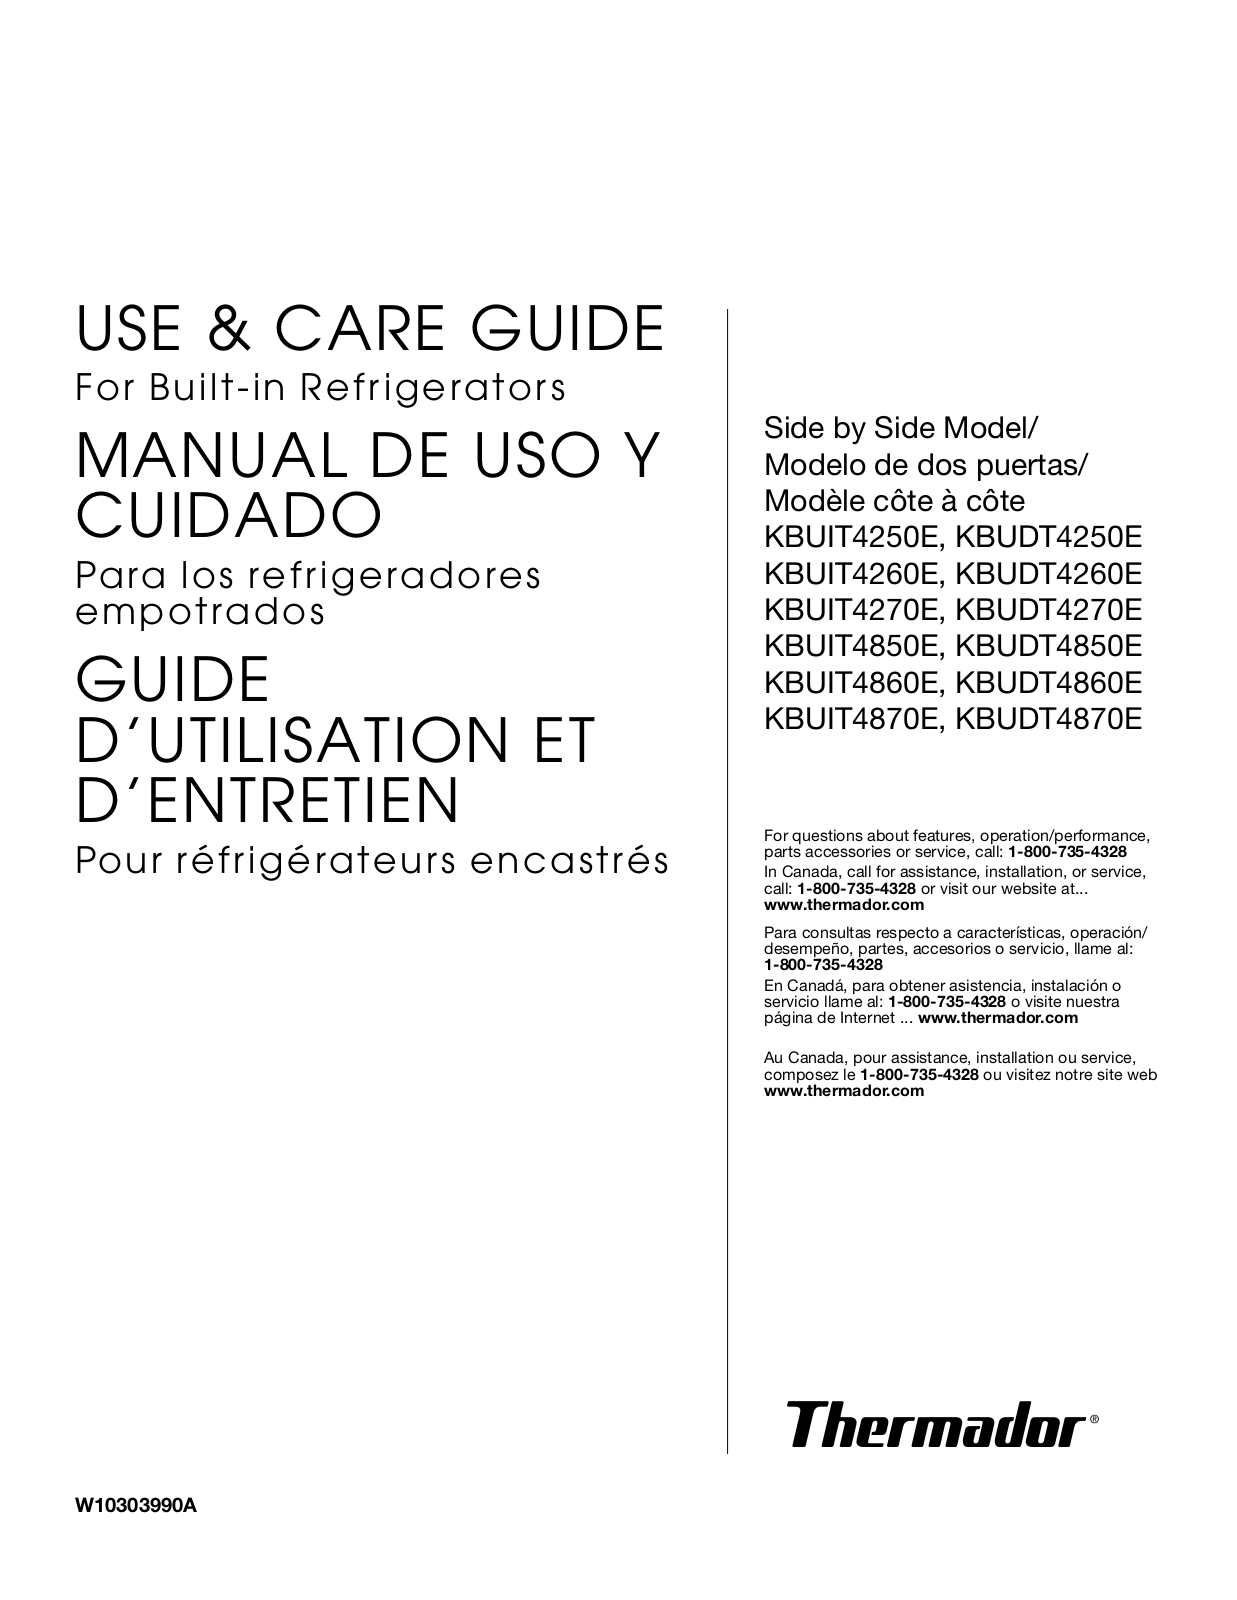 KITCHENAID KBUDT4875E, KBUDT4275E, KBUDT4255E, KBUDT4855E, KBUDT4265E Owner's Manual